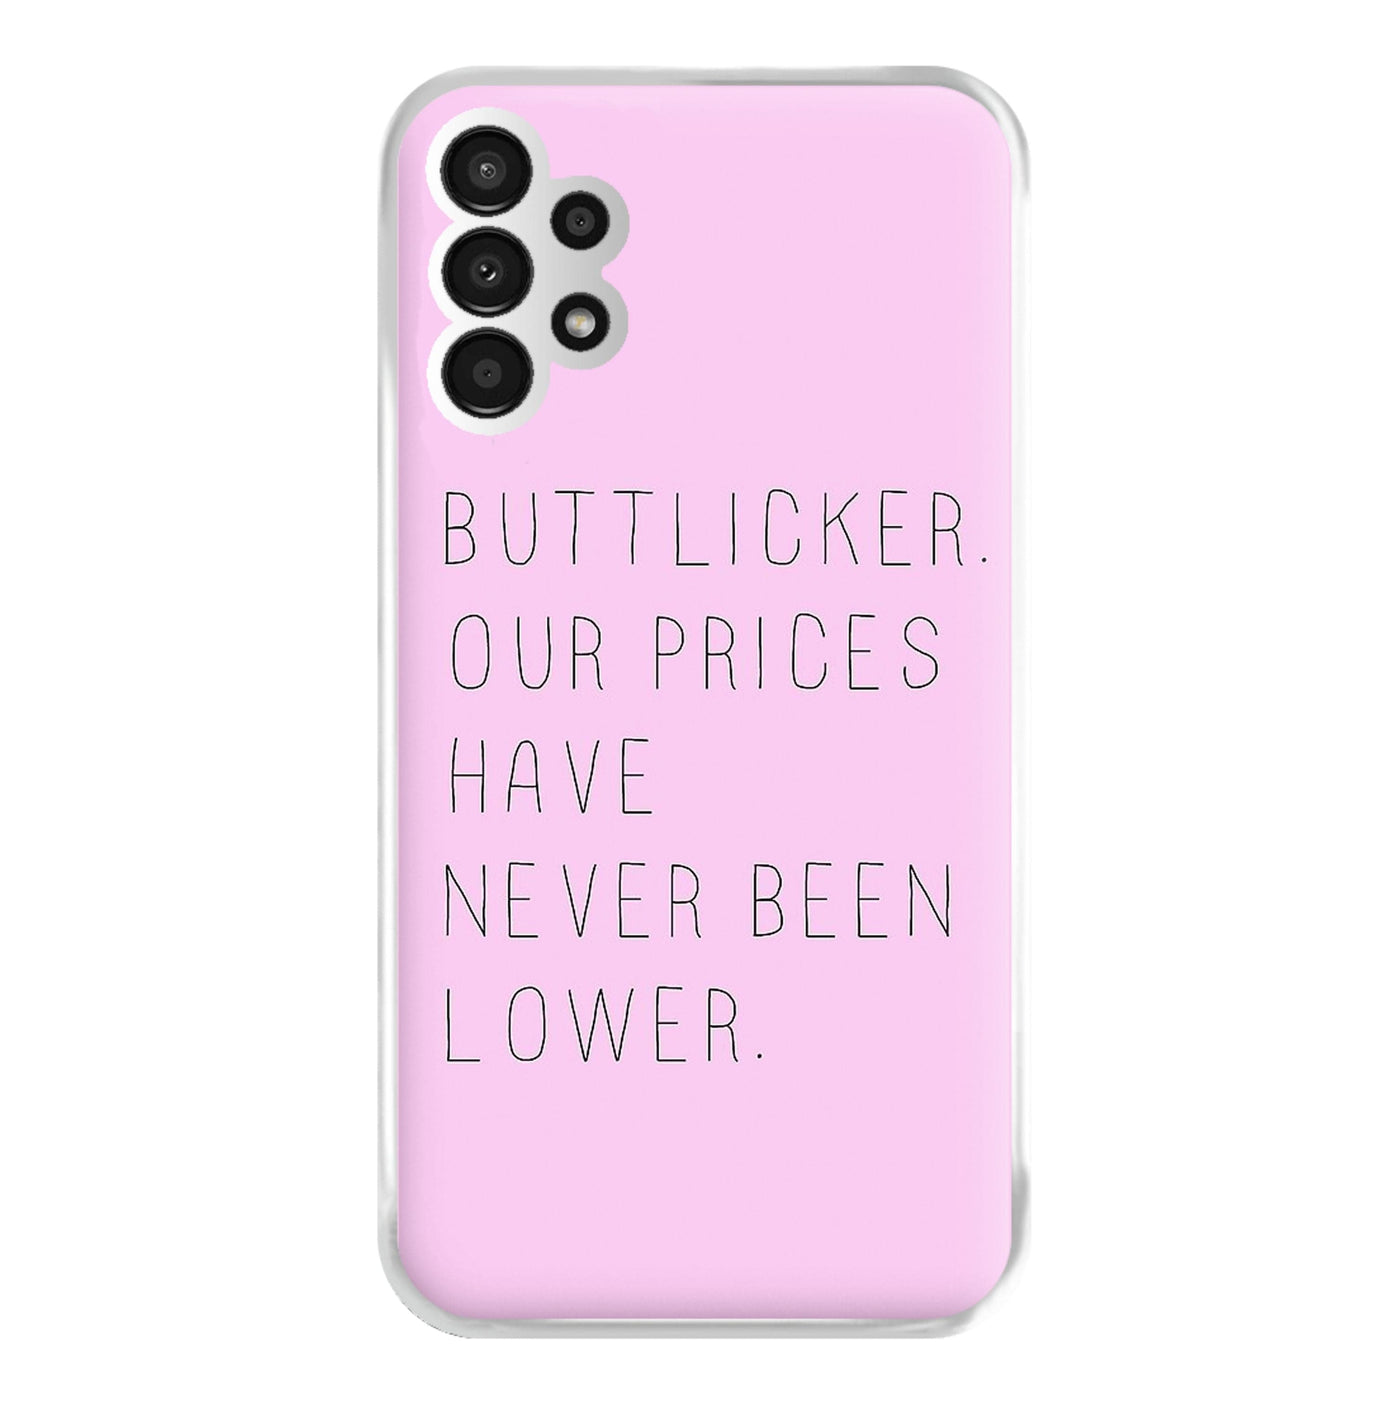 Buttlicker, Our Prices Have Never Been Lower - The Office Phone Case